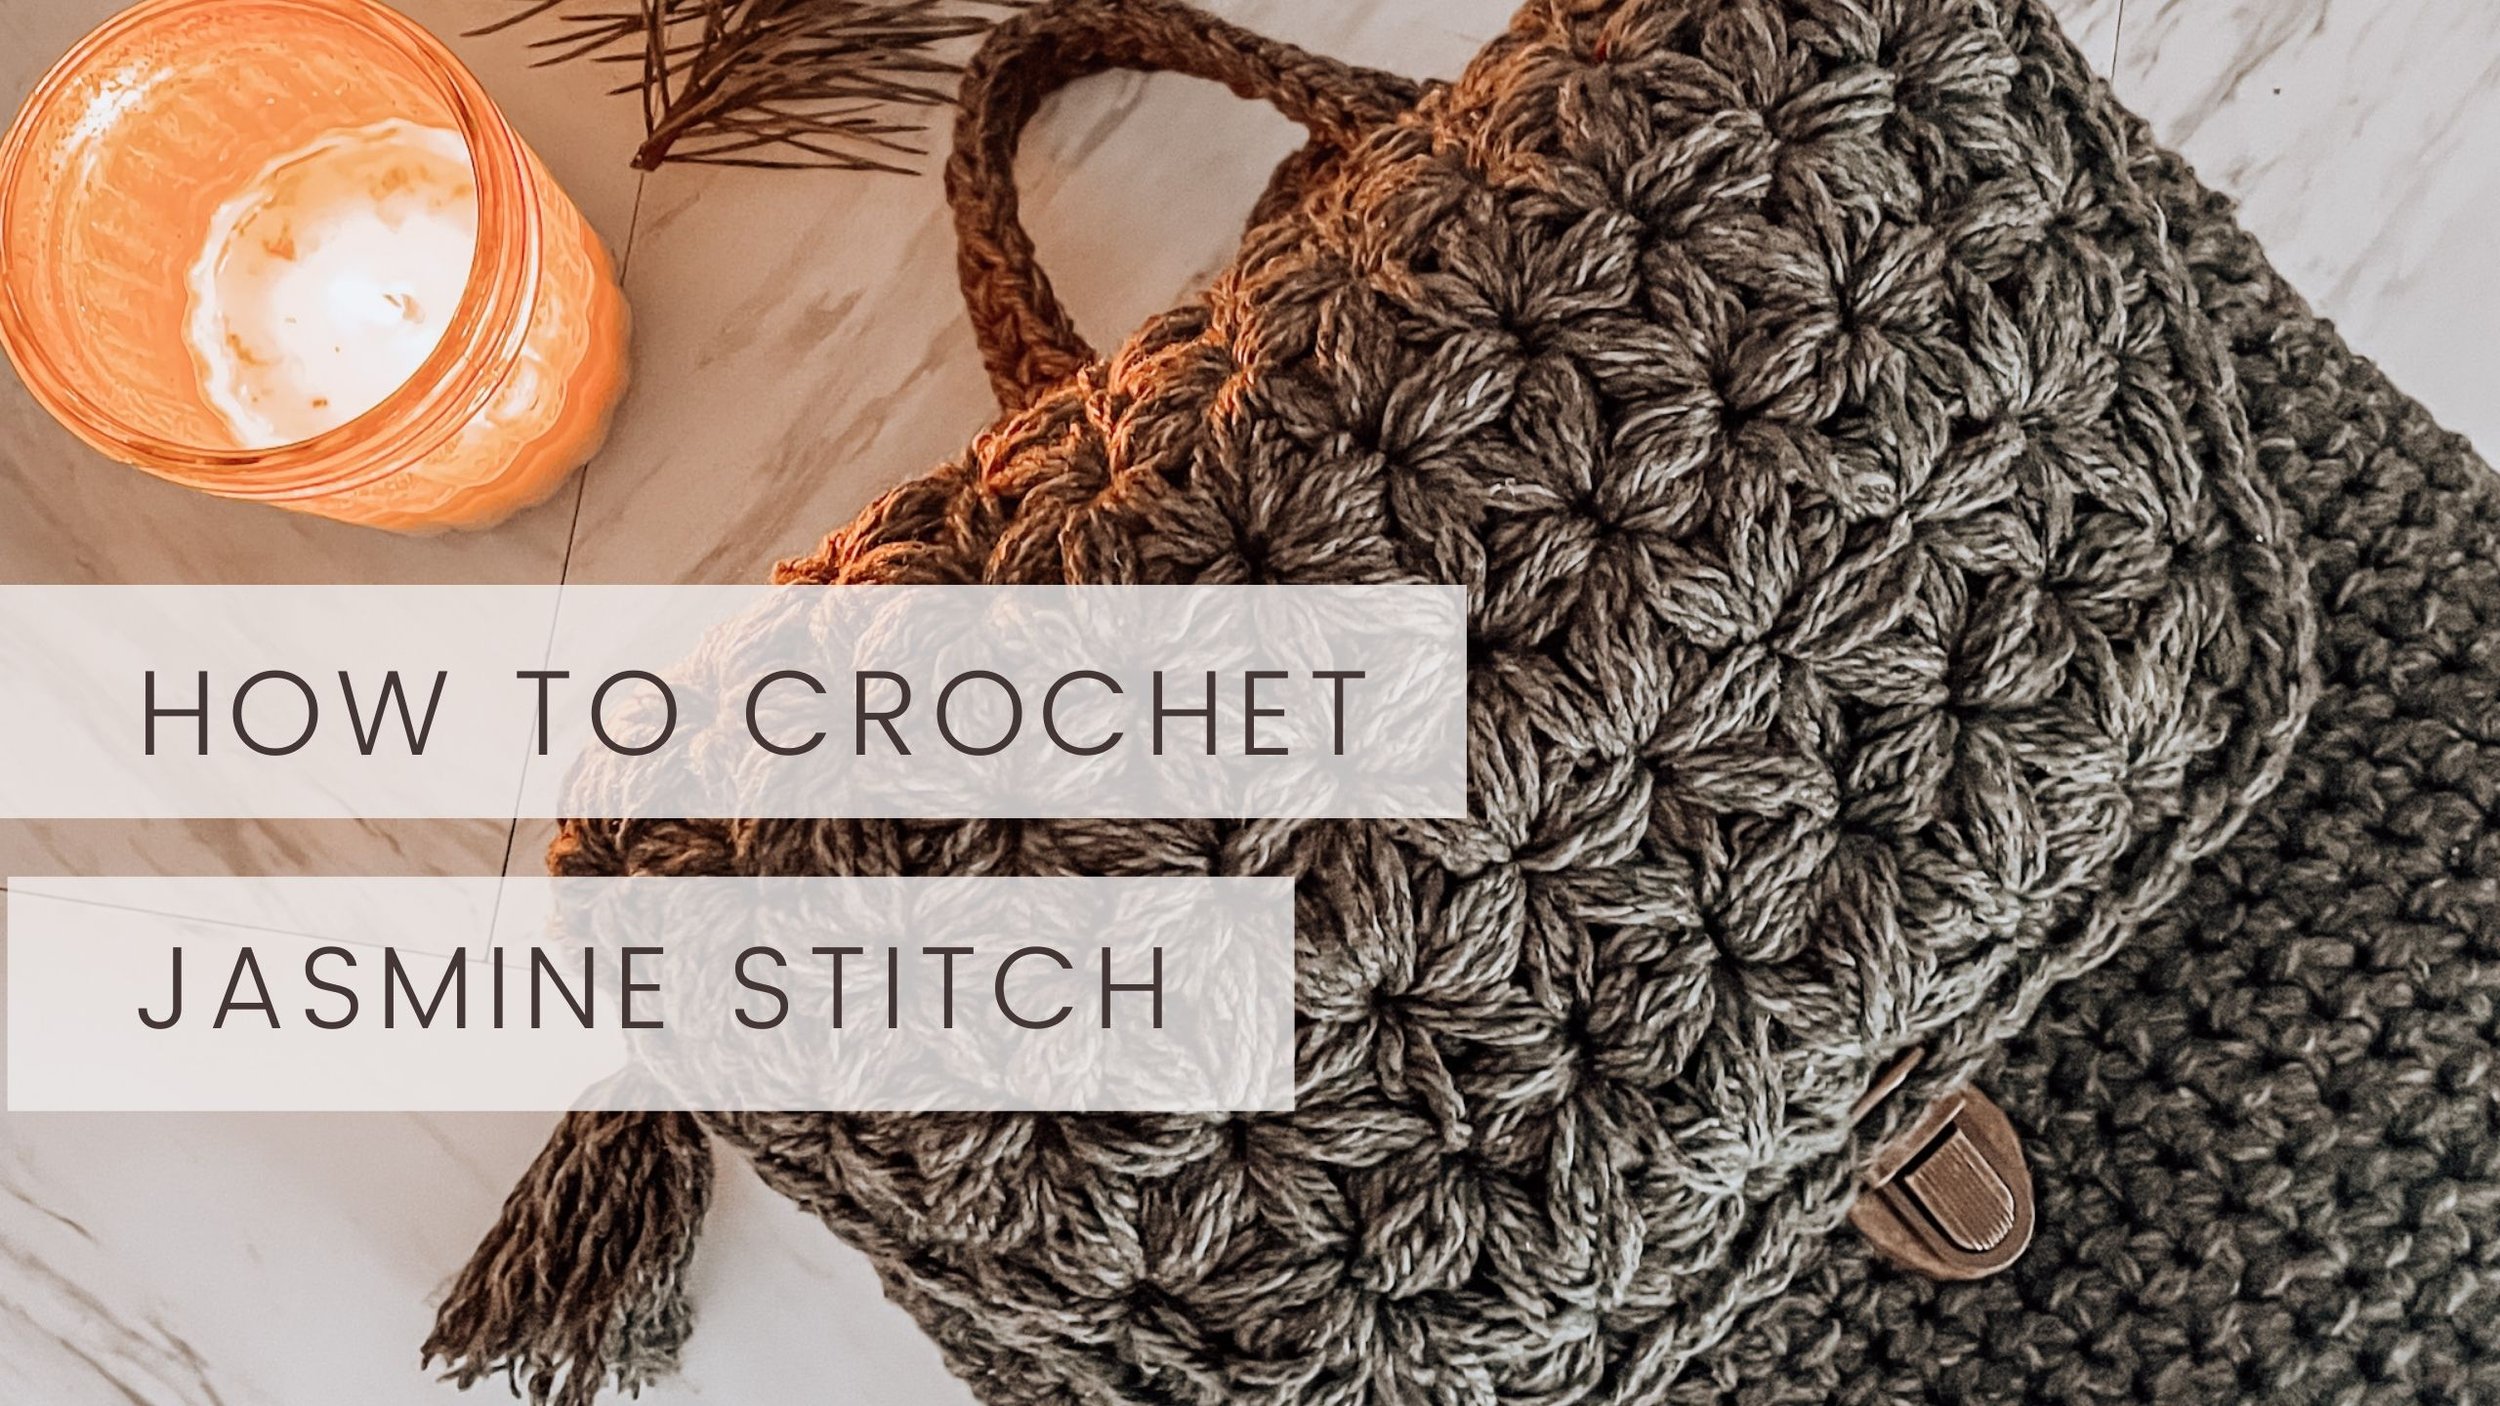 Crochet Bags With Fringe - Video And Ideas